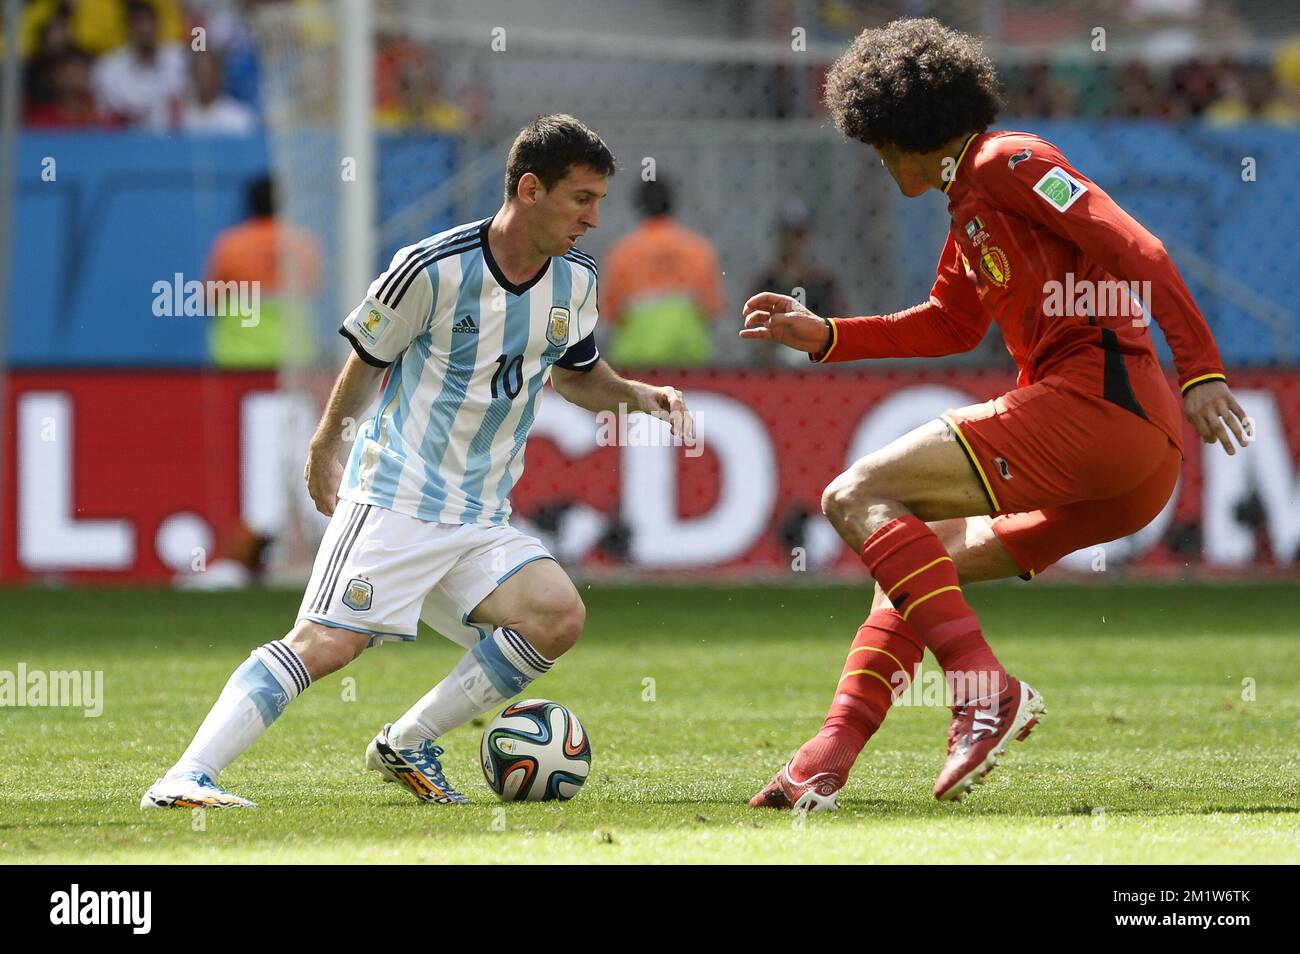 Argentina's Lionel Messi and Belgium's Marouane Fellaini fight for the ball during the quarter final match between Belgian national soccer team Red Devils and Argentina, in Estadio Nacional Mane Garrincha, in Brasilia, Brazil, during the 2014 FIFA World Cup, Saturday 05 July 2014.  BELGA PHOTO DIRK WAEM Stock Photo